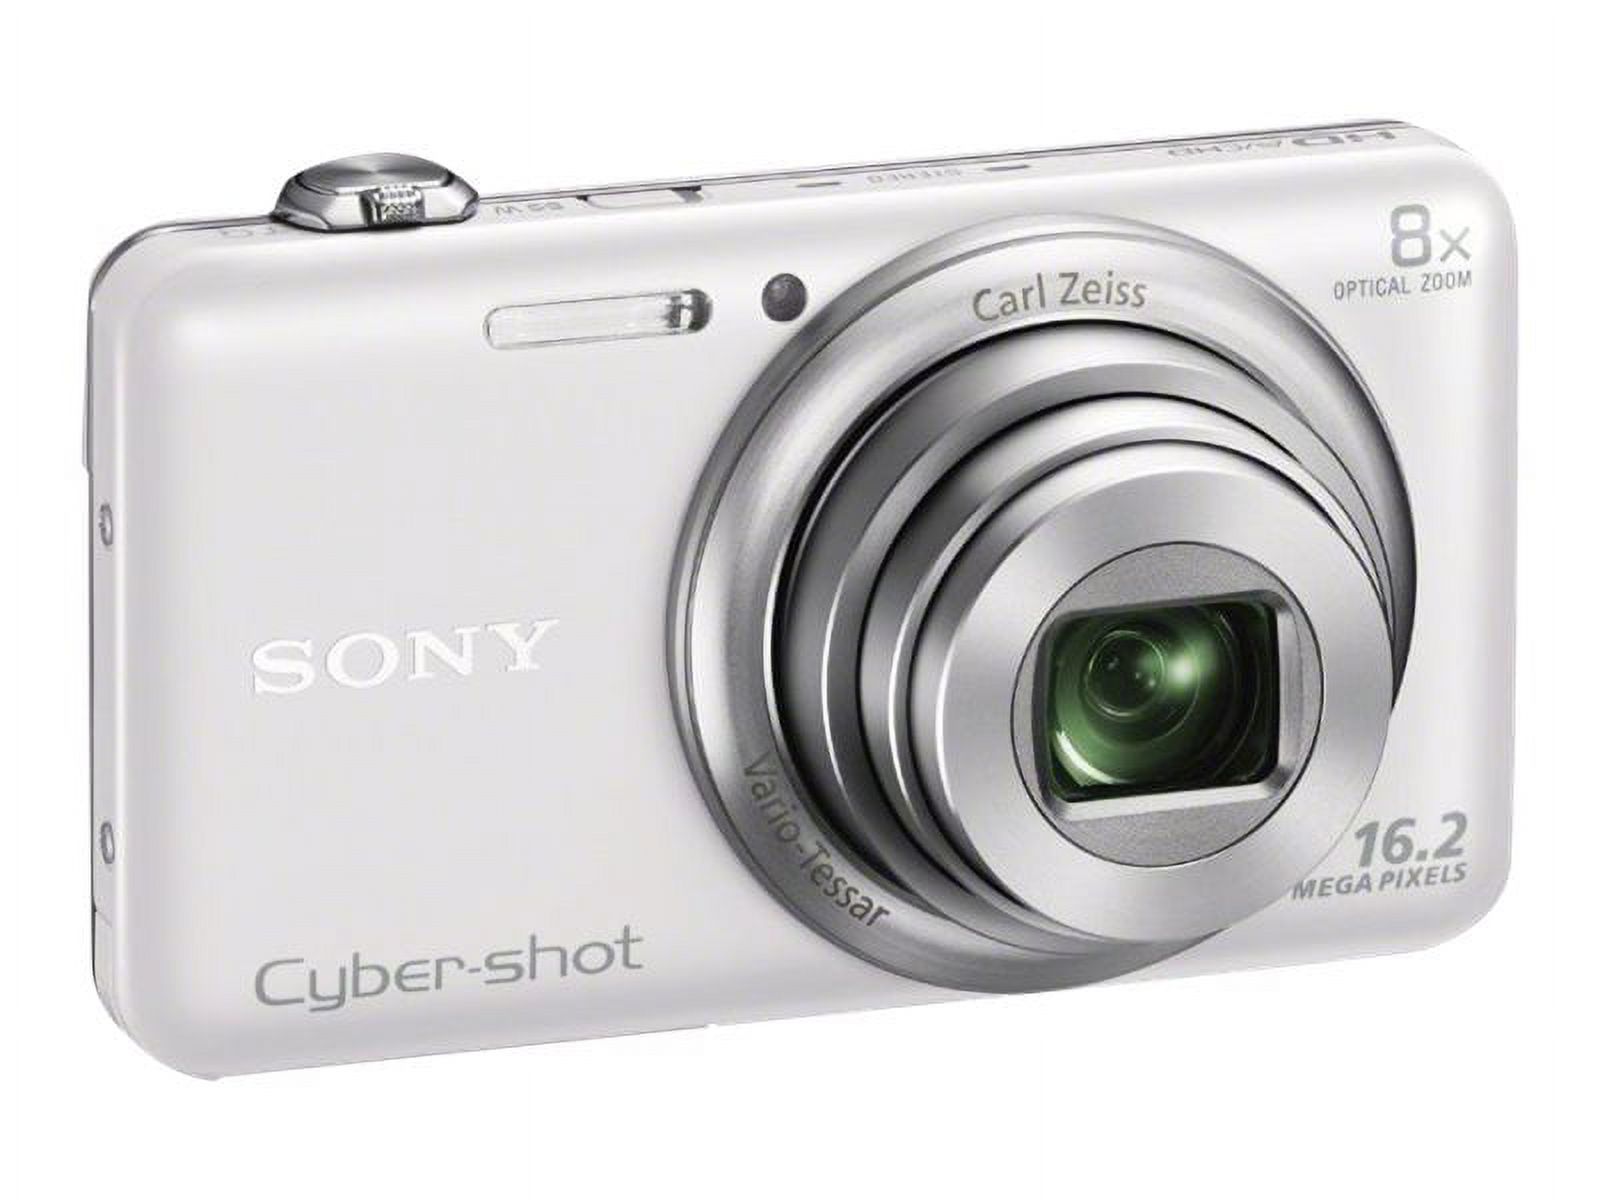 Sony Cyber-shot DSC-WX80 - Digital camera - compact - 16.2 MP - 8x optical zoom - Carl Zeiss - Wi-Fi - white - image 3 of 4